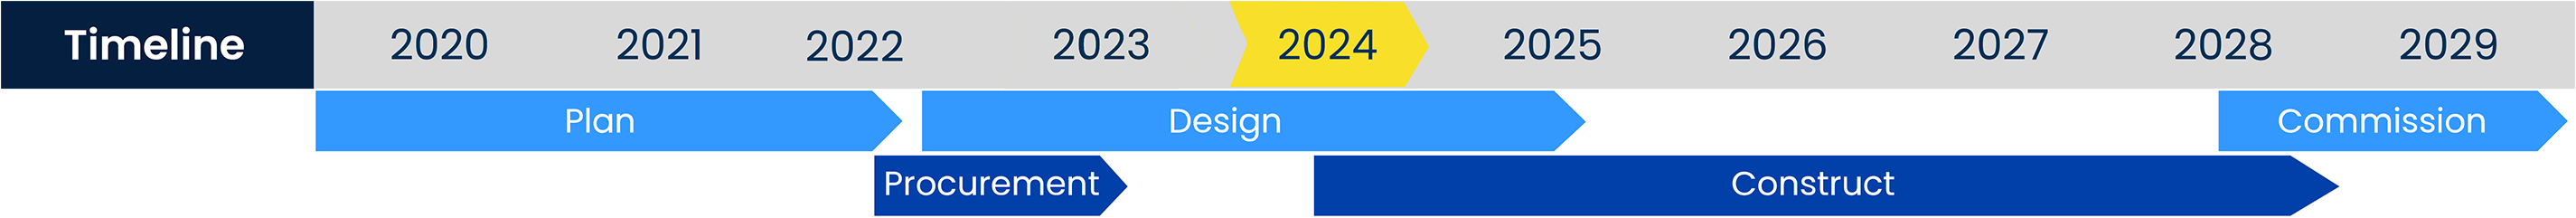 Project timeline: 2020-2022 is the Plan phase. 2022 to 2023 Is the procurement phase. 2022 to 2025 is the design phase. 2024 to 2028 is Construction. 2028 to 2029 is Commission. 